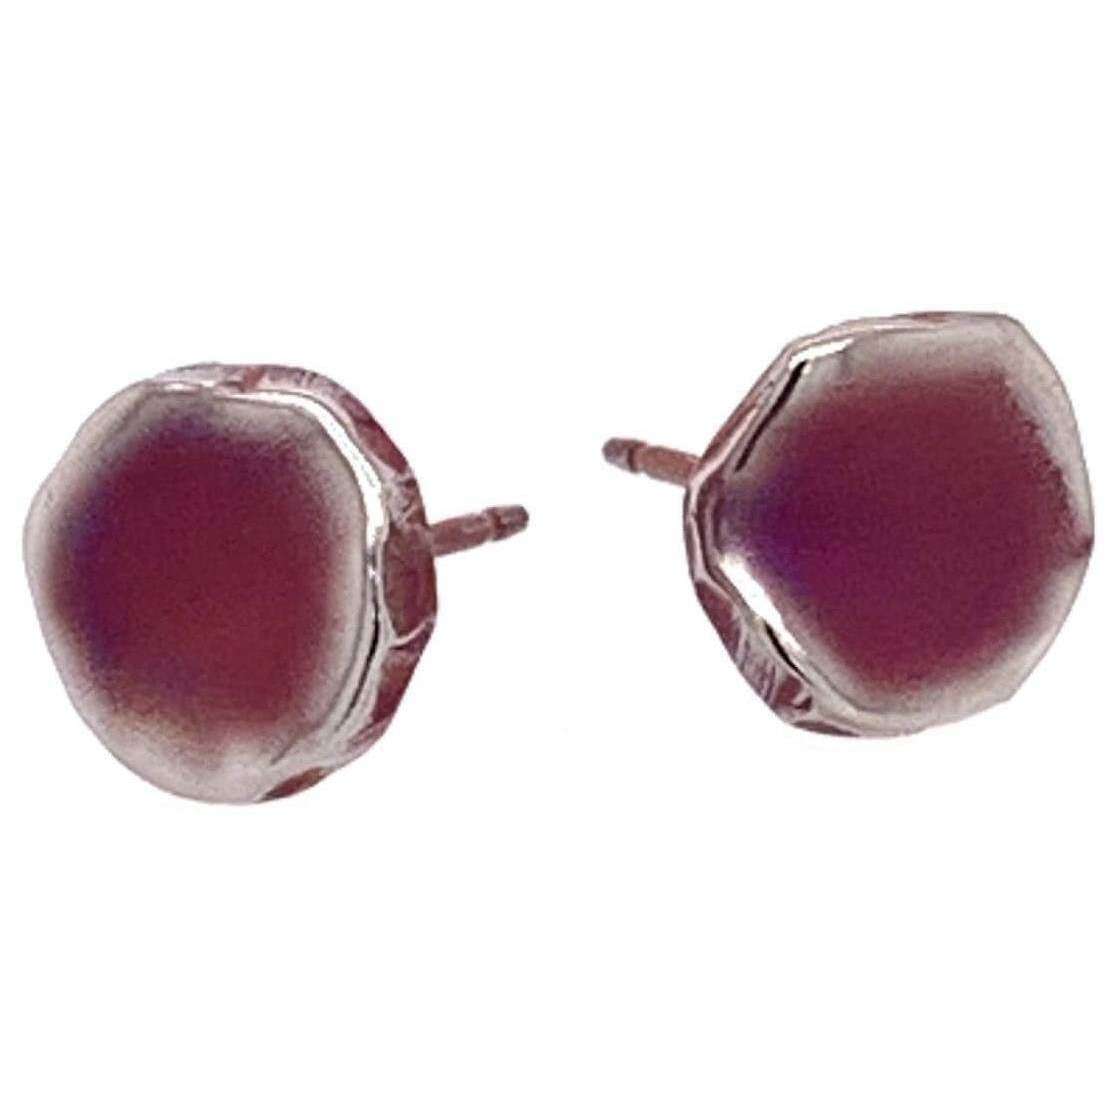 ti2 titanium squashed 9mm round stud earrings - coffee brown